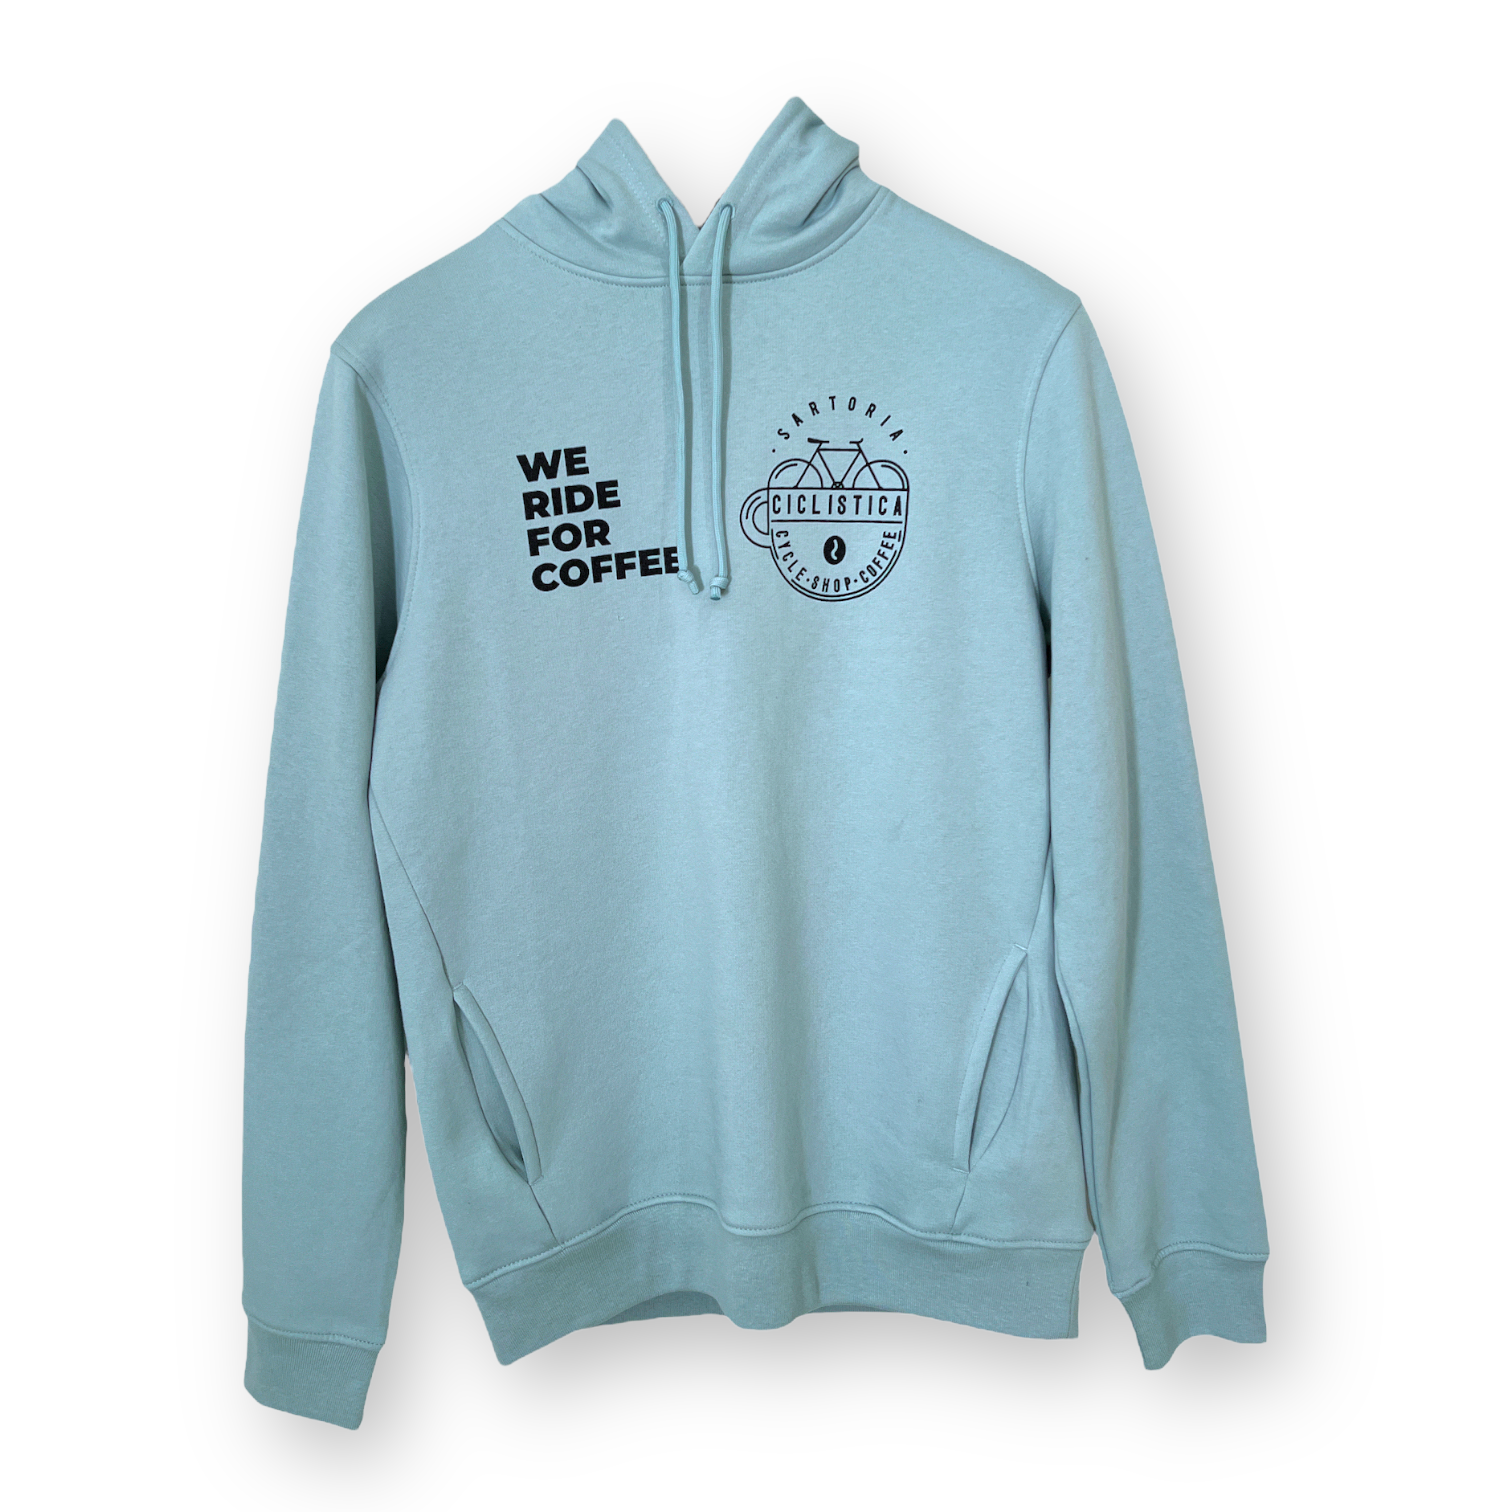 Coppi blue hoodie "We ride for coffee"